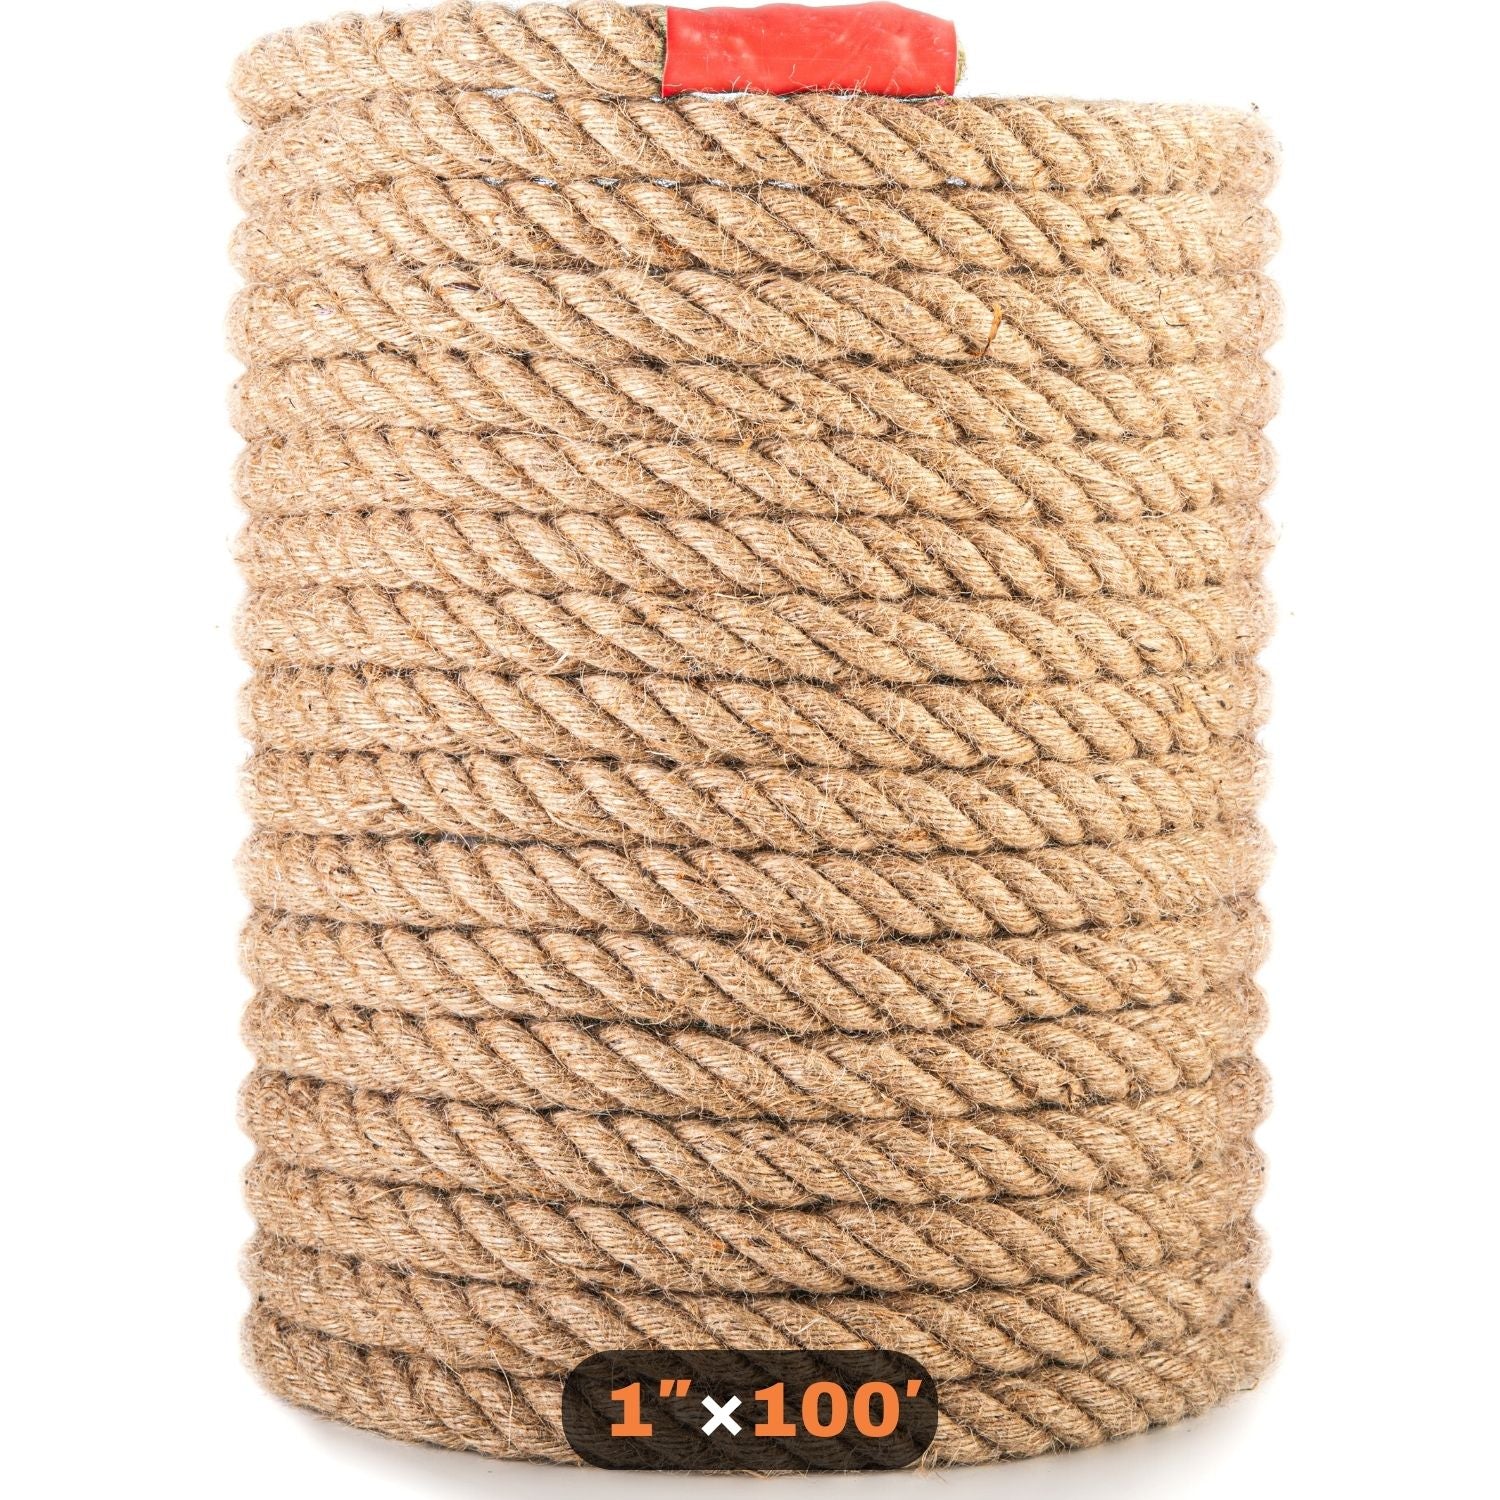 1 1/2 inch x 100ft Jute Rope Natural Thick Heavy Hemp Rope Nautical Ropes Twisted Manila Rope for Crafts, Climbing, Bundling,Anchor, Hammock